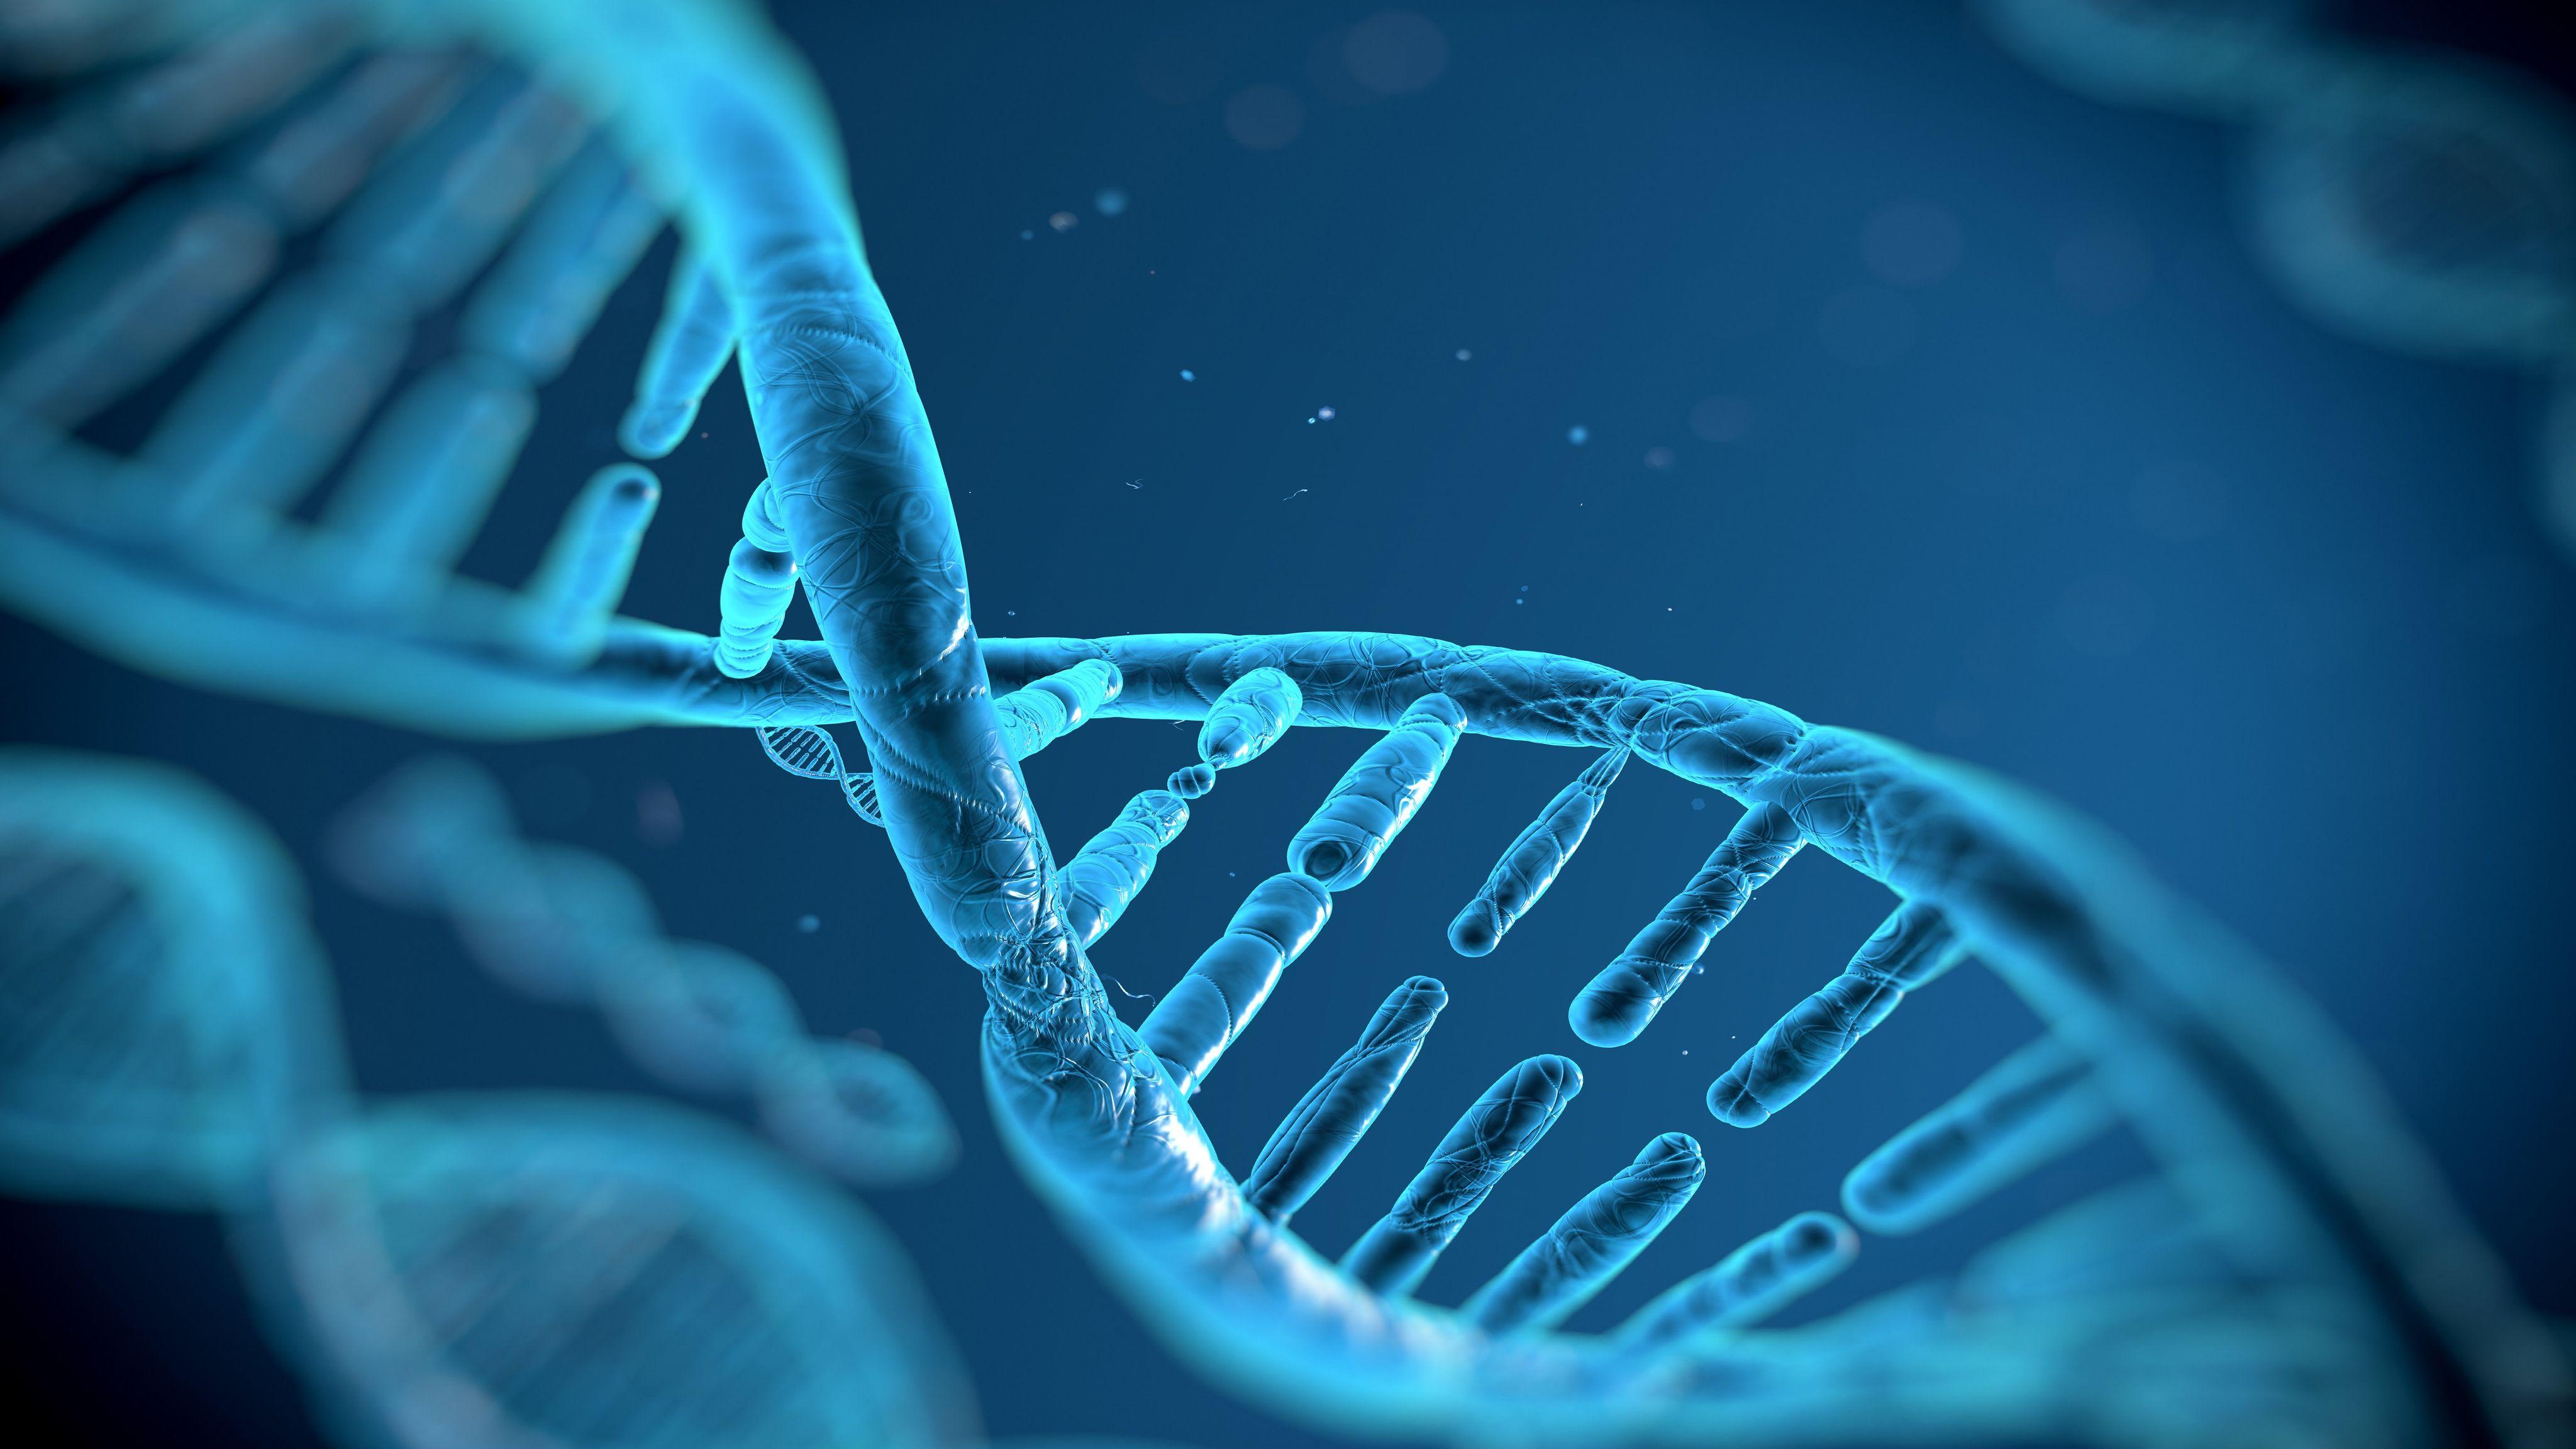 Science template wallpaper or banner with a dna Vector Image